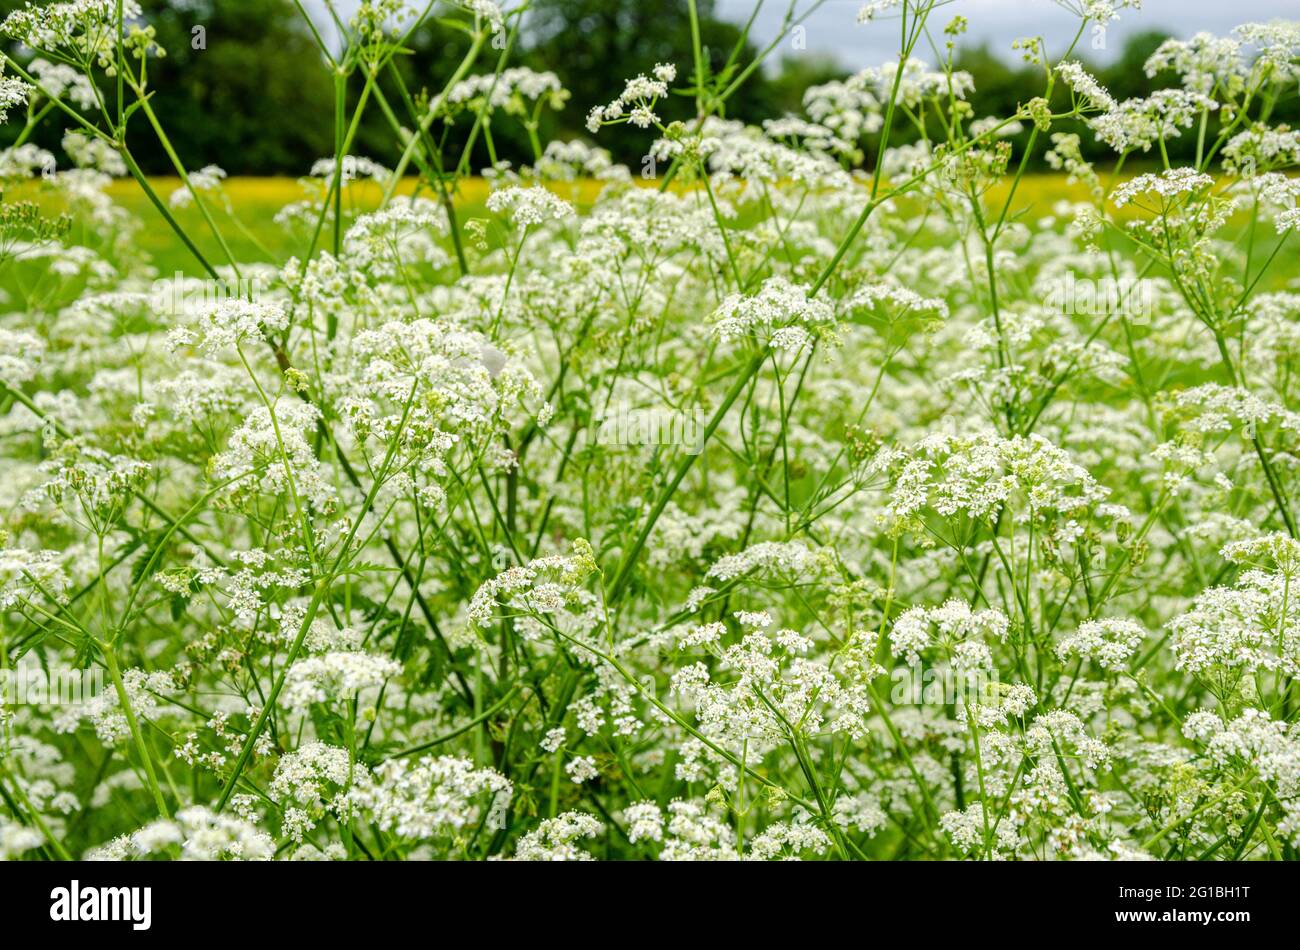 Cow parsley growing at the edge of a field has white flowers. Stock Photo